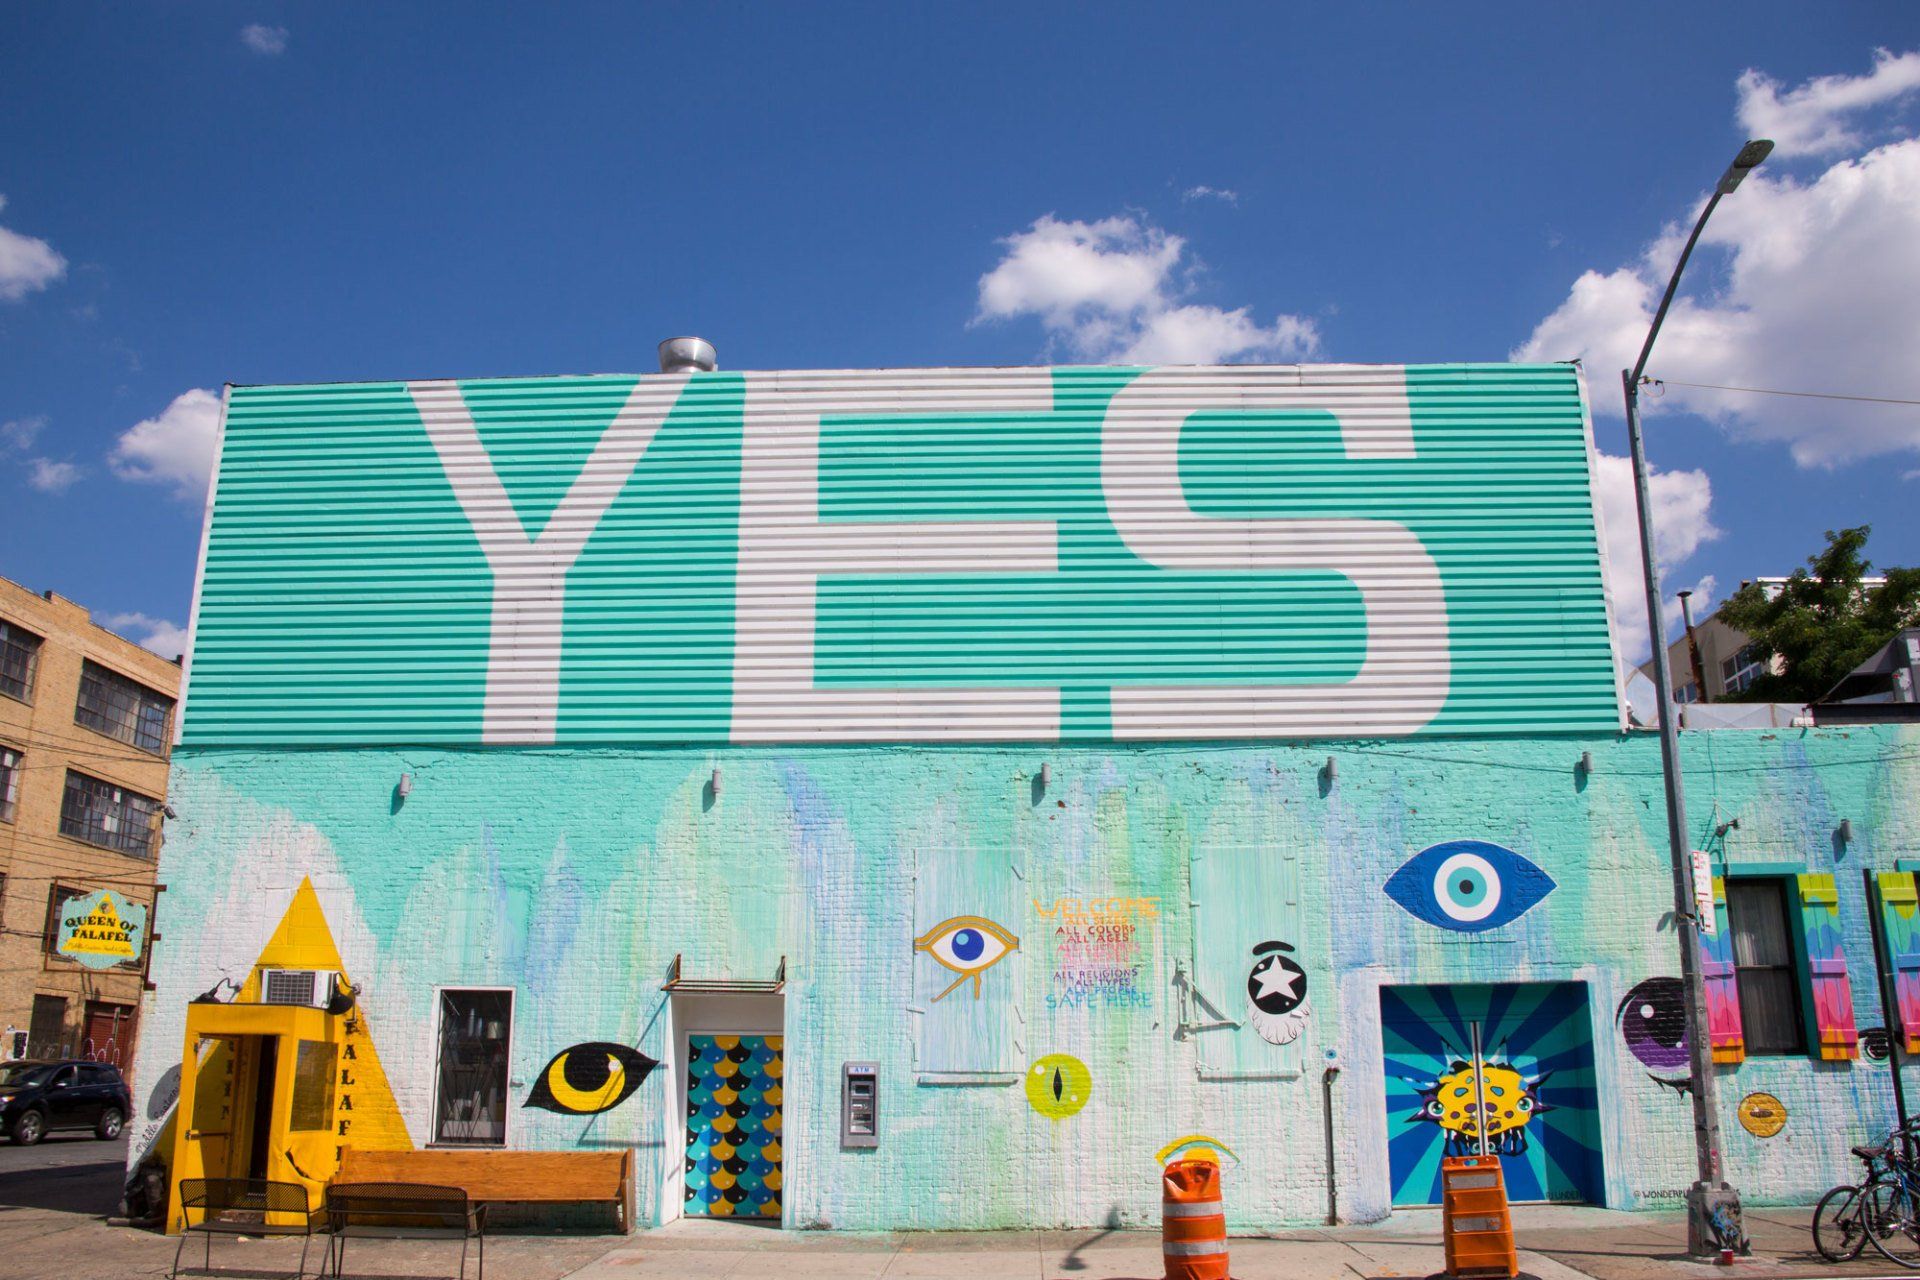 House of Yes, Brooklyn, New York